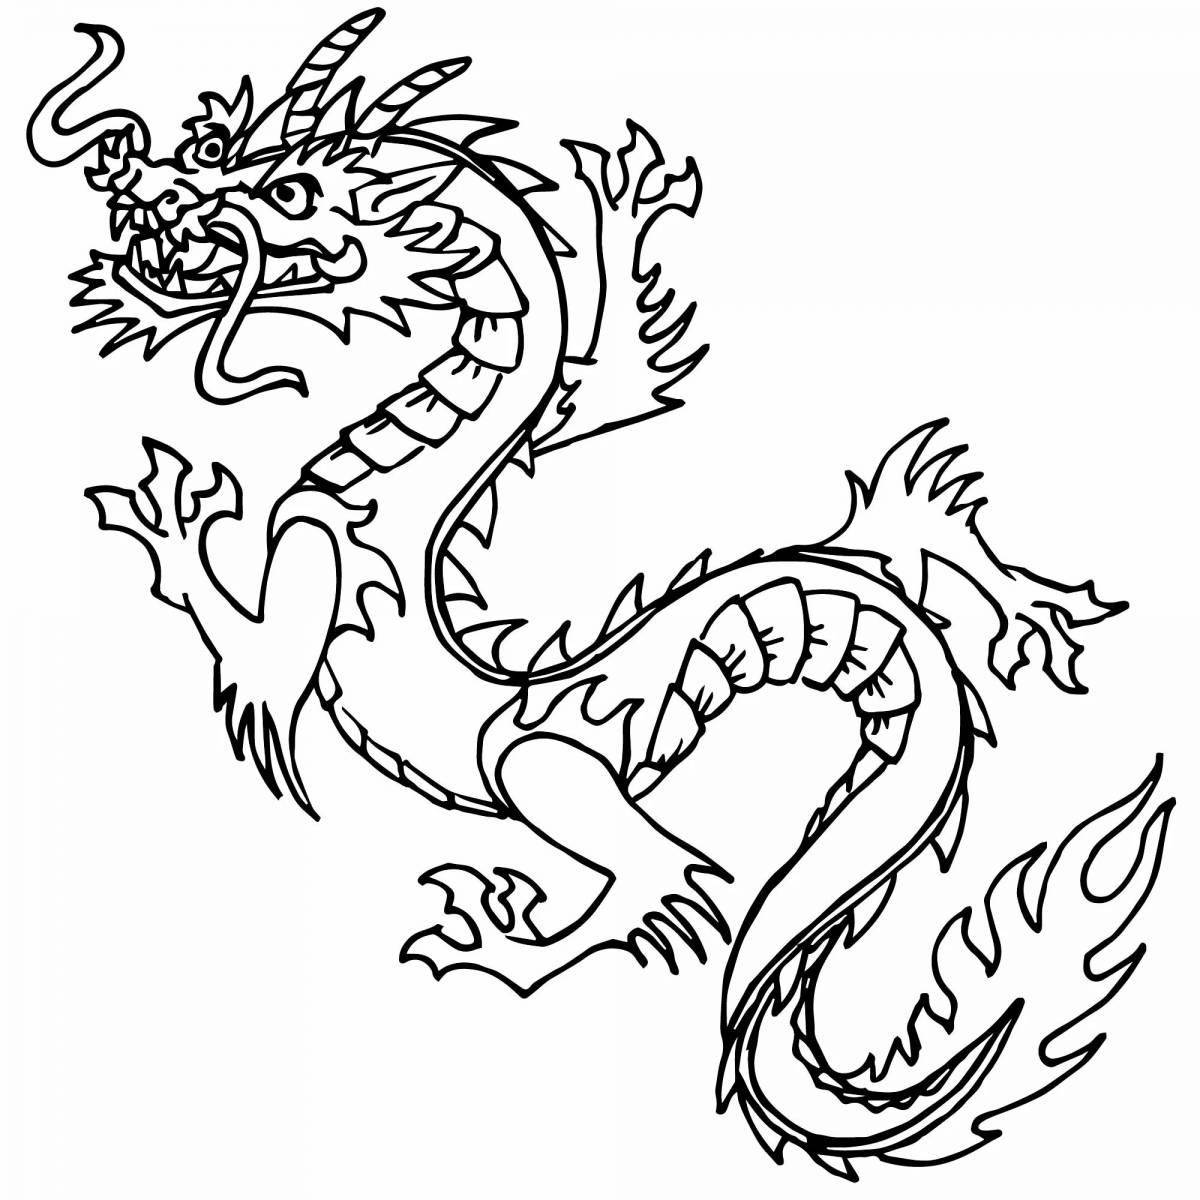 Colorfully detailed Japanese dragon coloring page